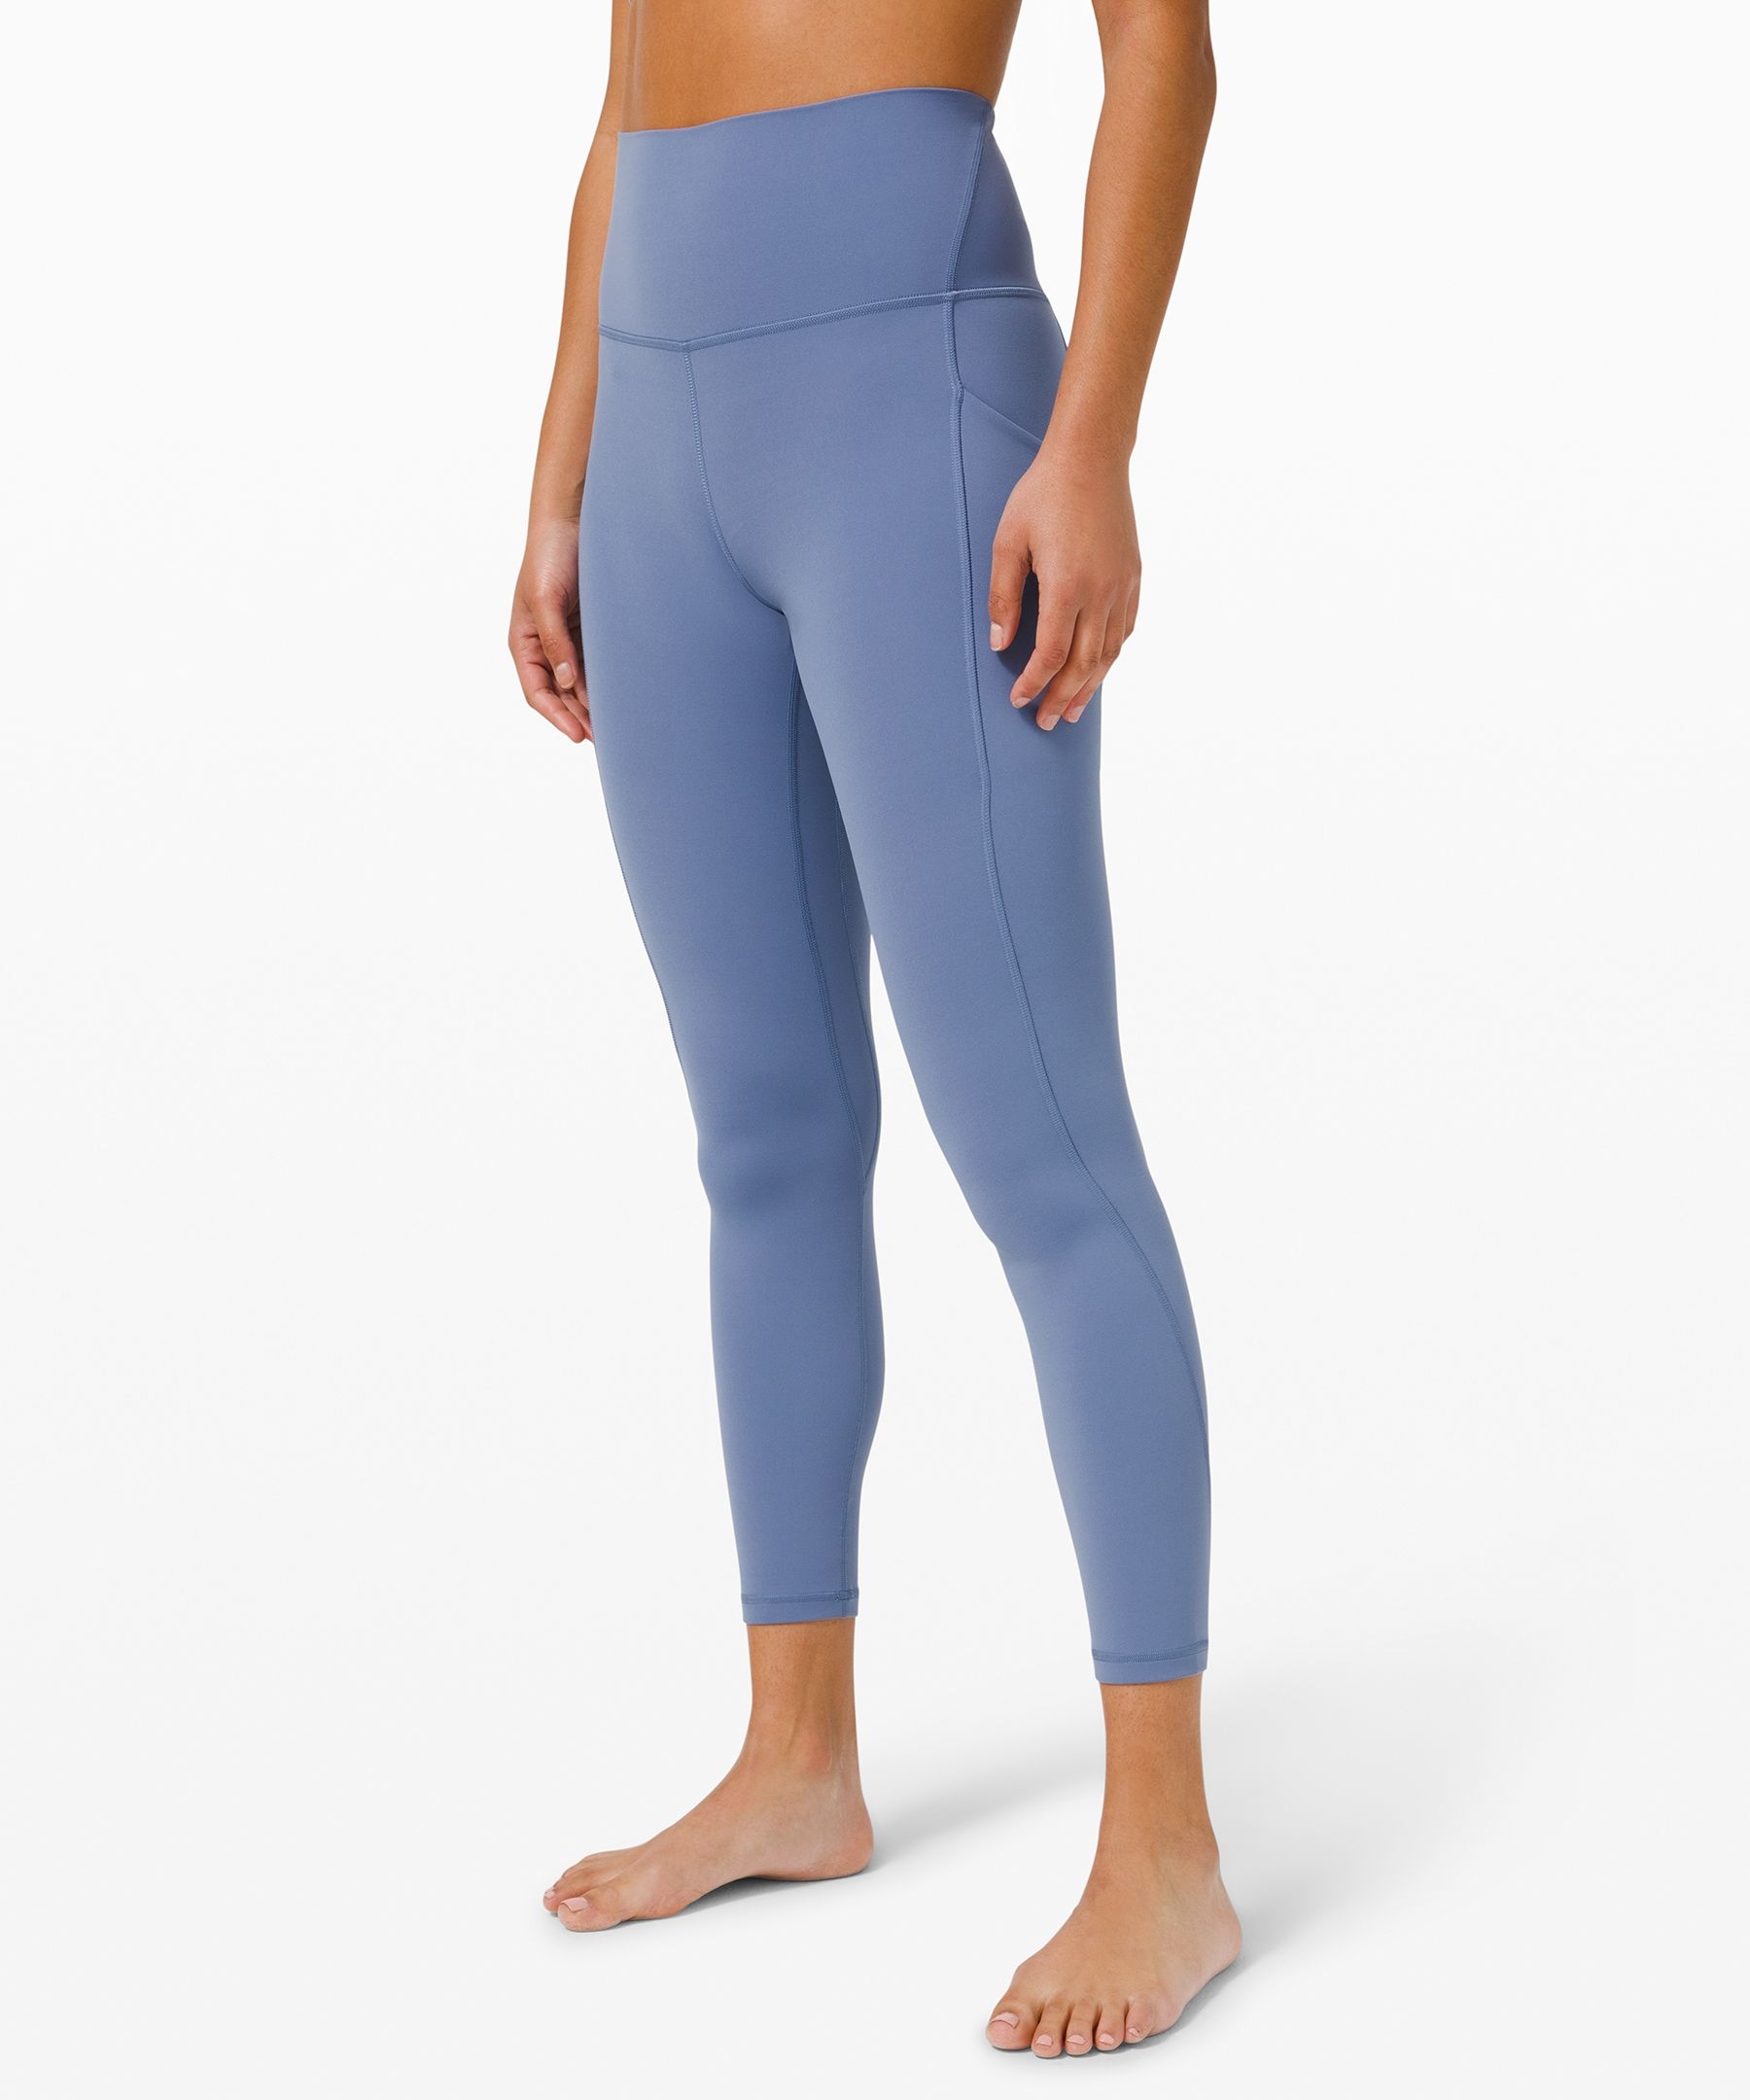 Plus Solid Capris Sports Leggings With Phone Pocket | SHEIN IN